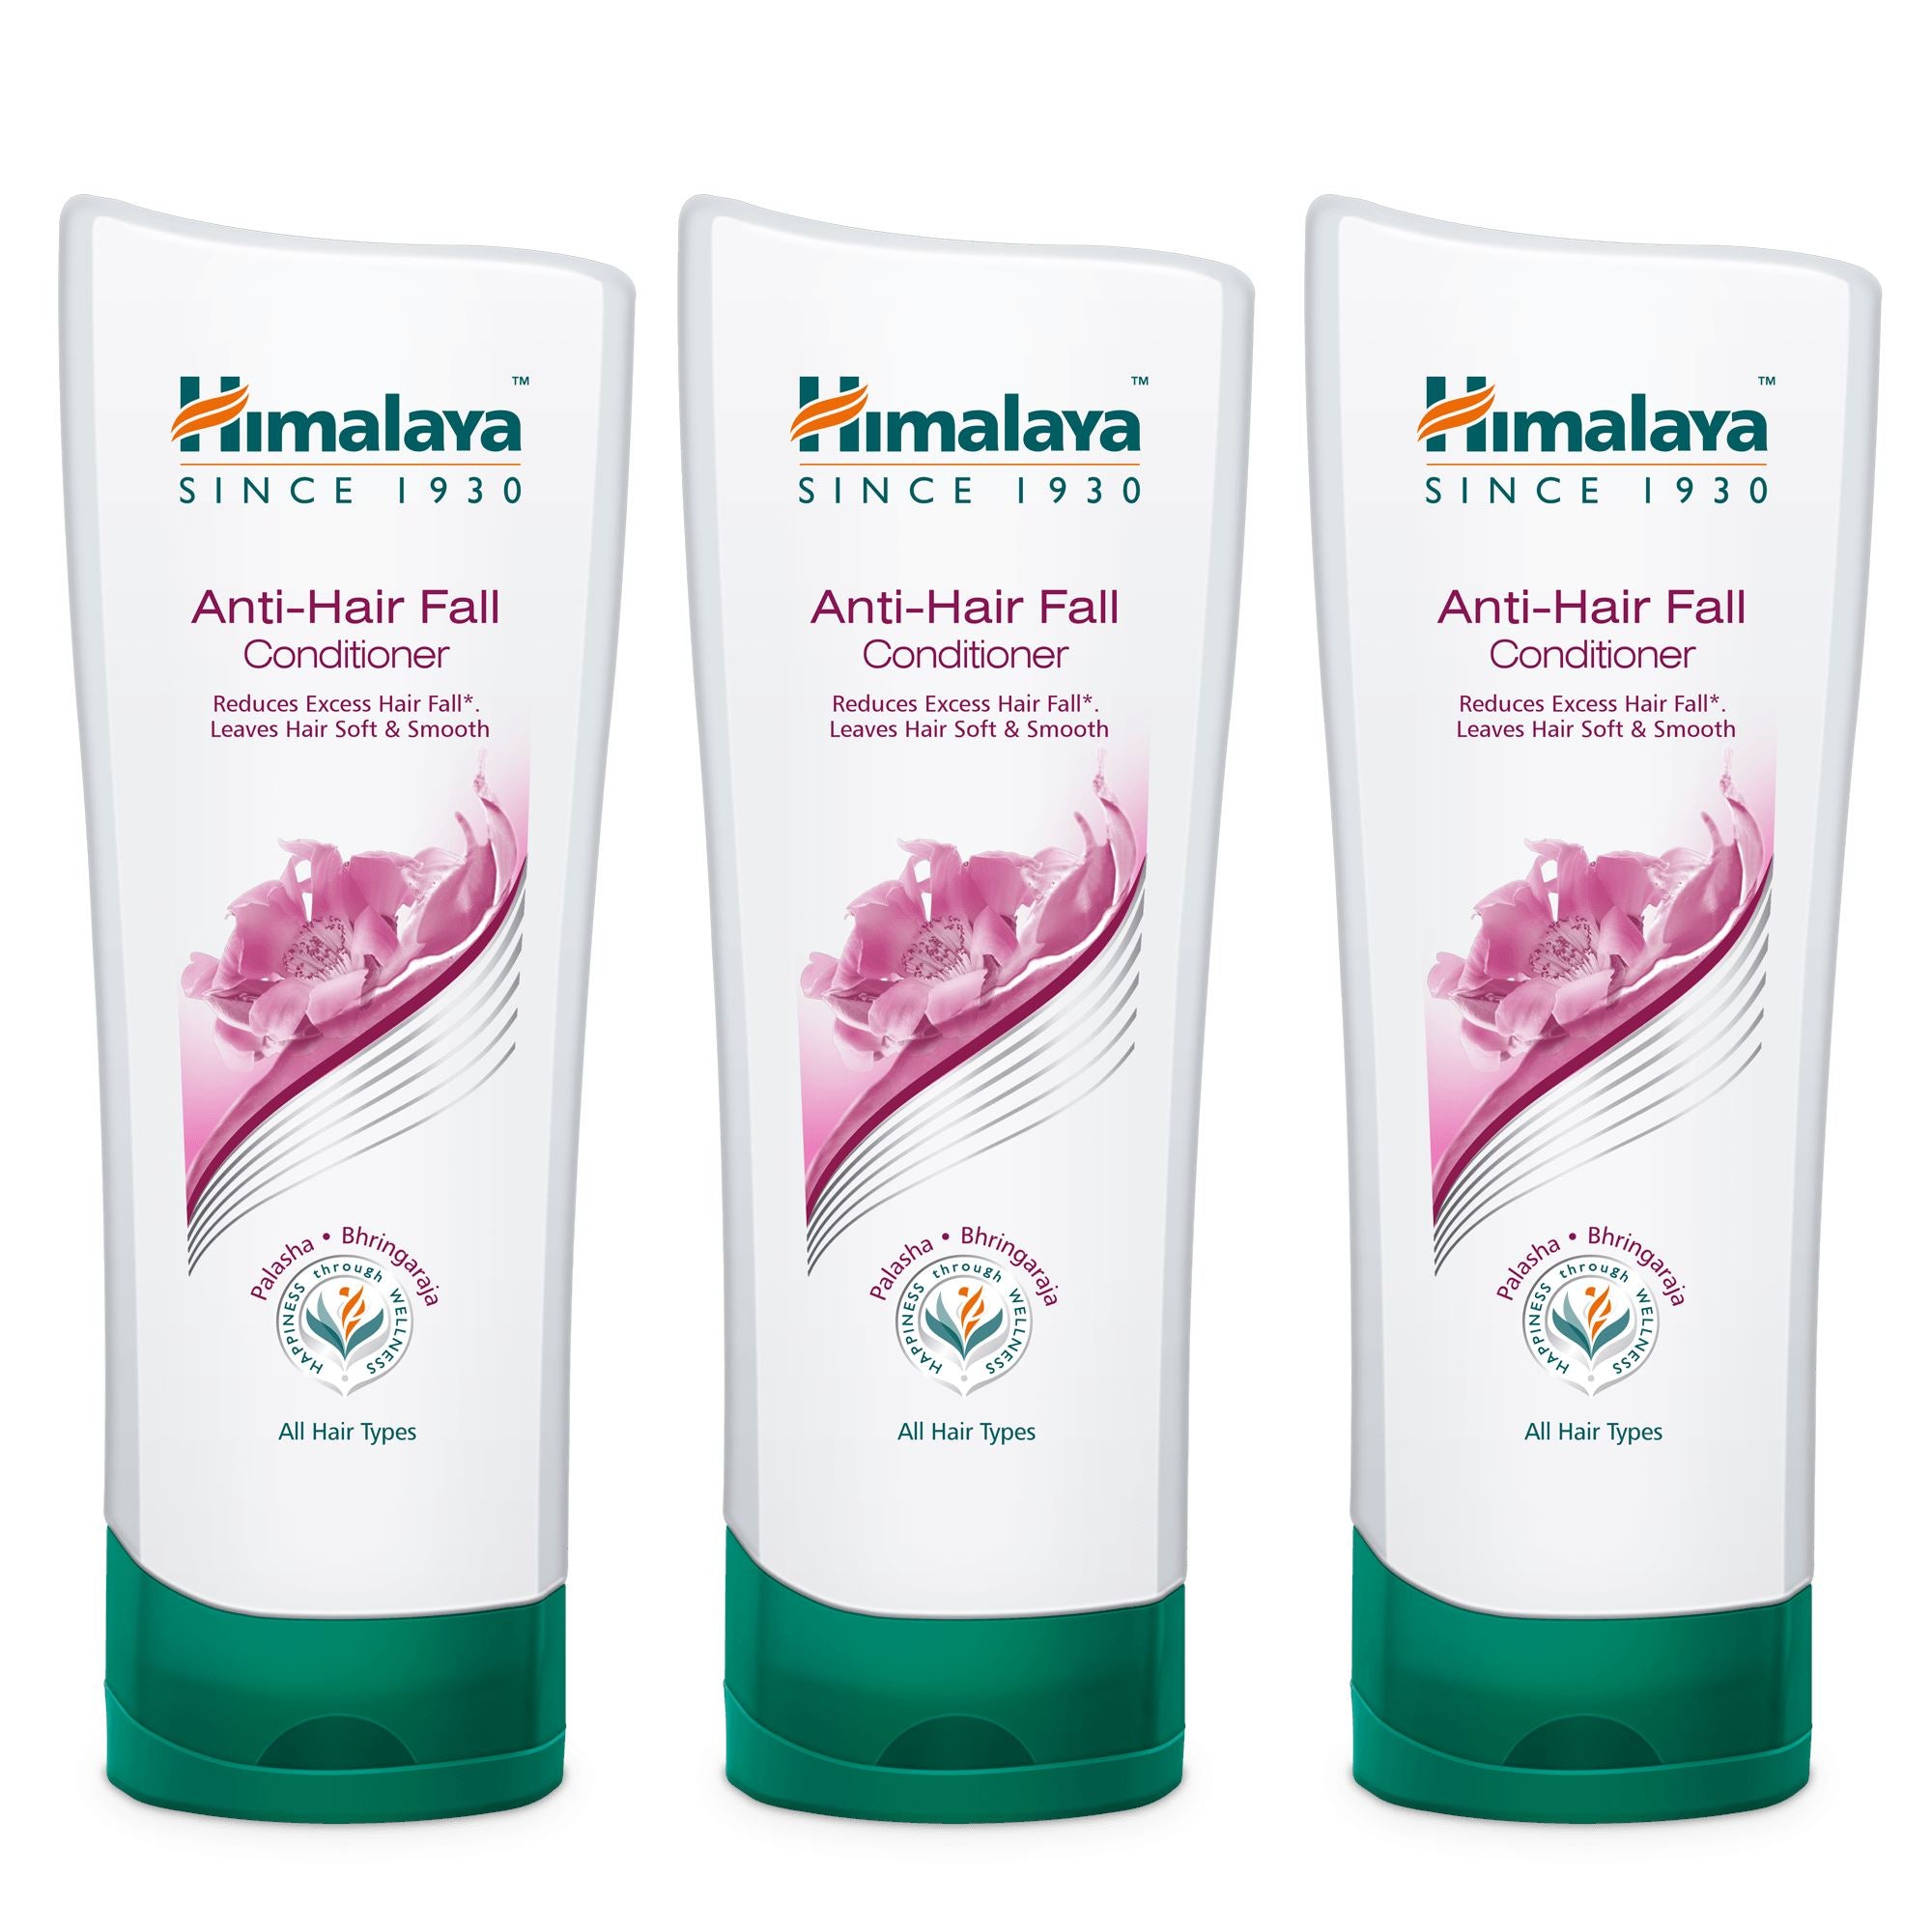 Himalaya Anti-Hair Fall Conditioner 100ml (Pack of 3)- Reduces Excess Hair Fall